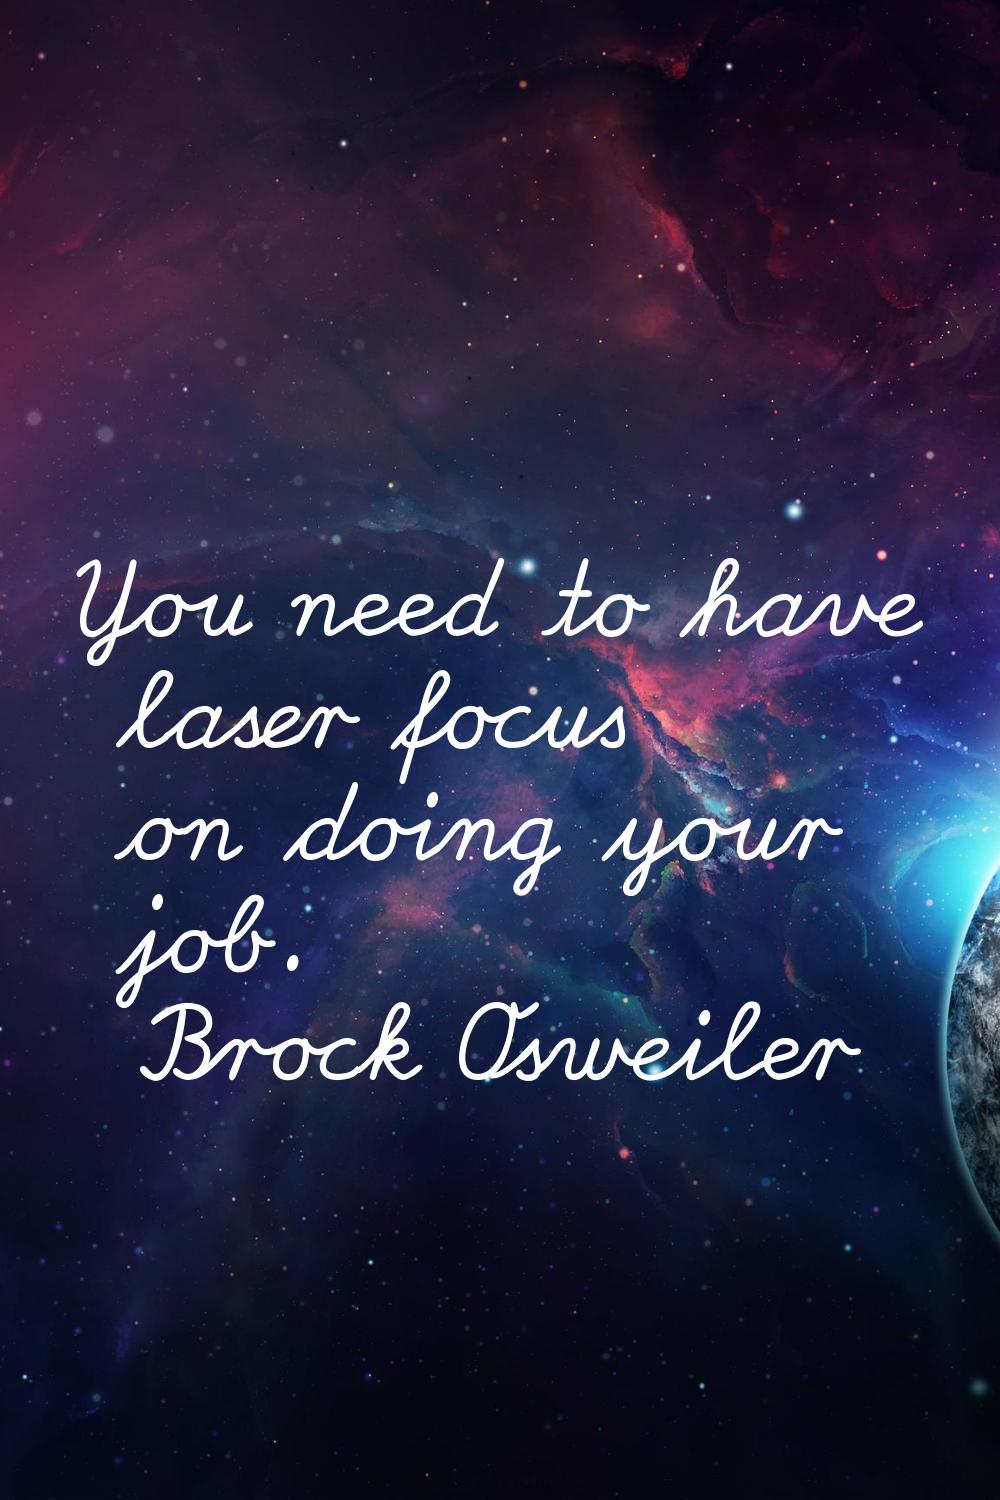 You need to have laser focus on doing your job.